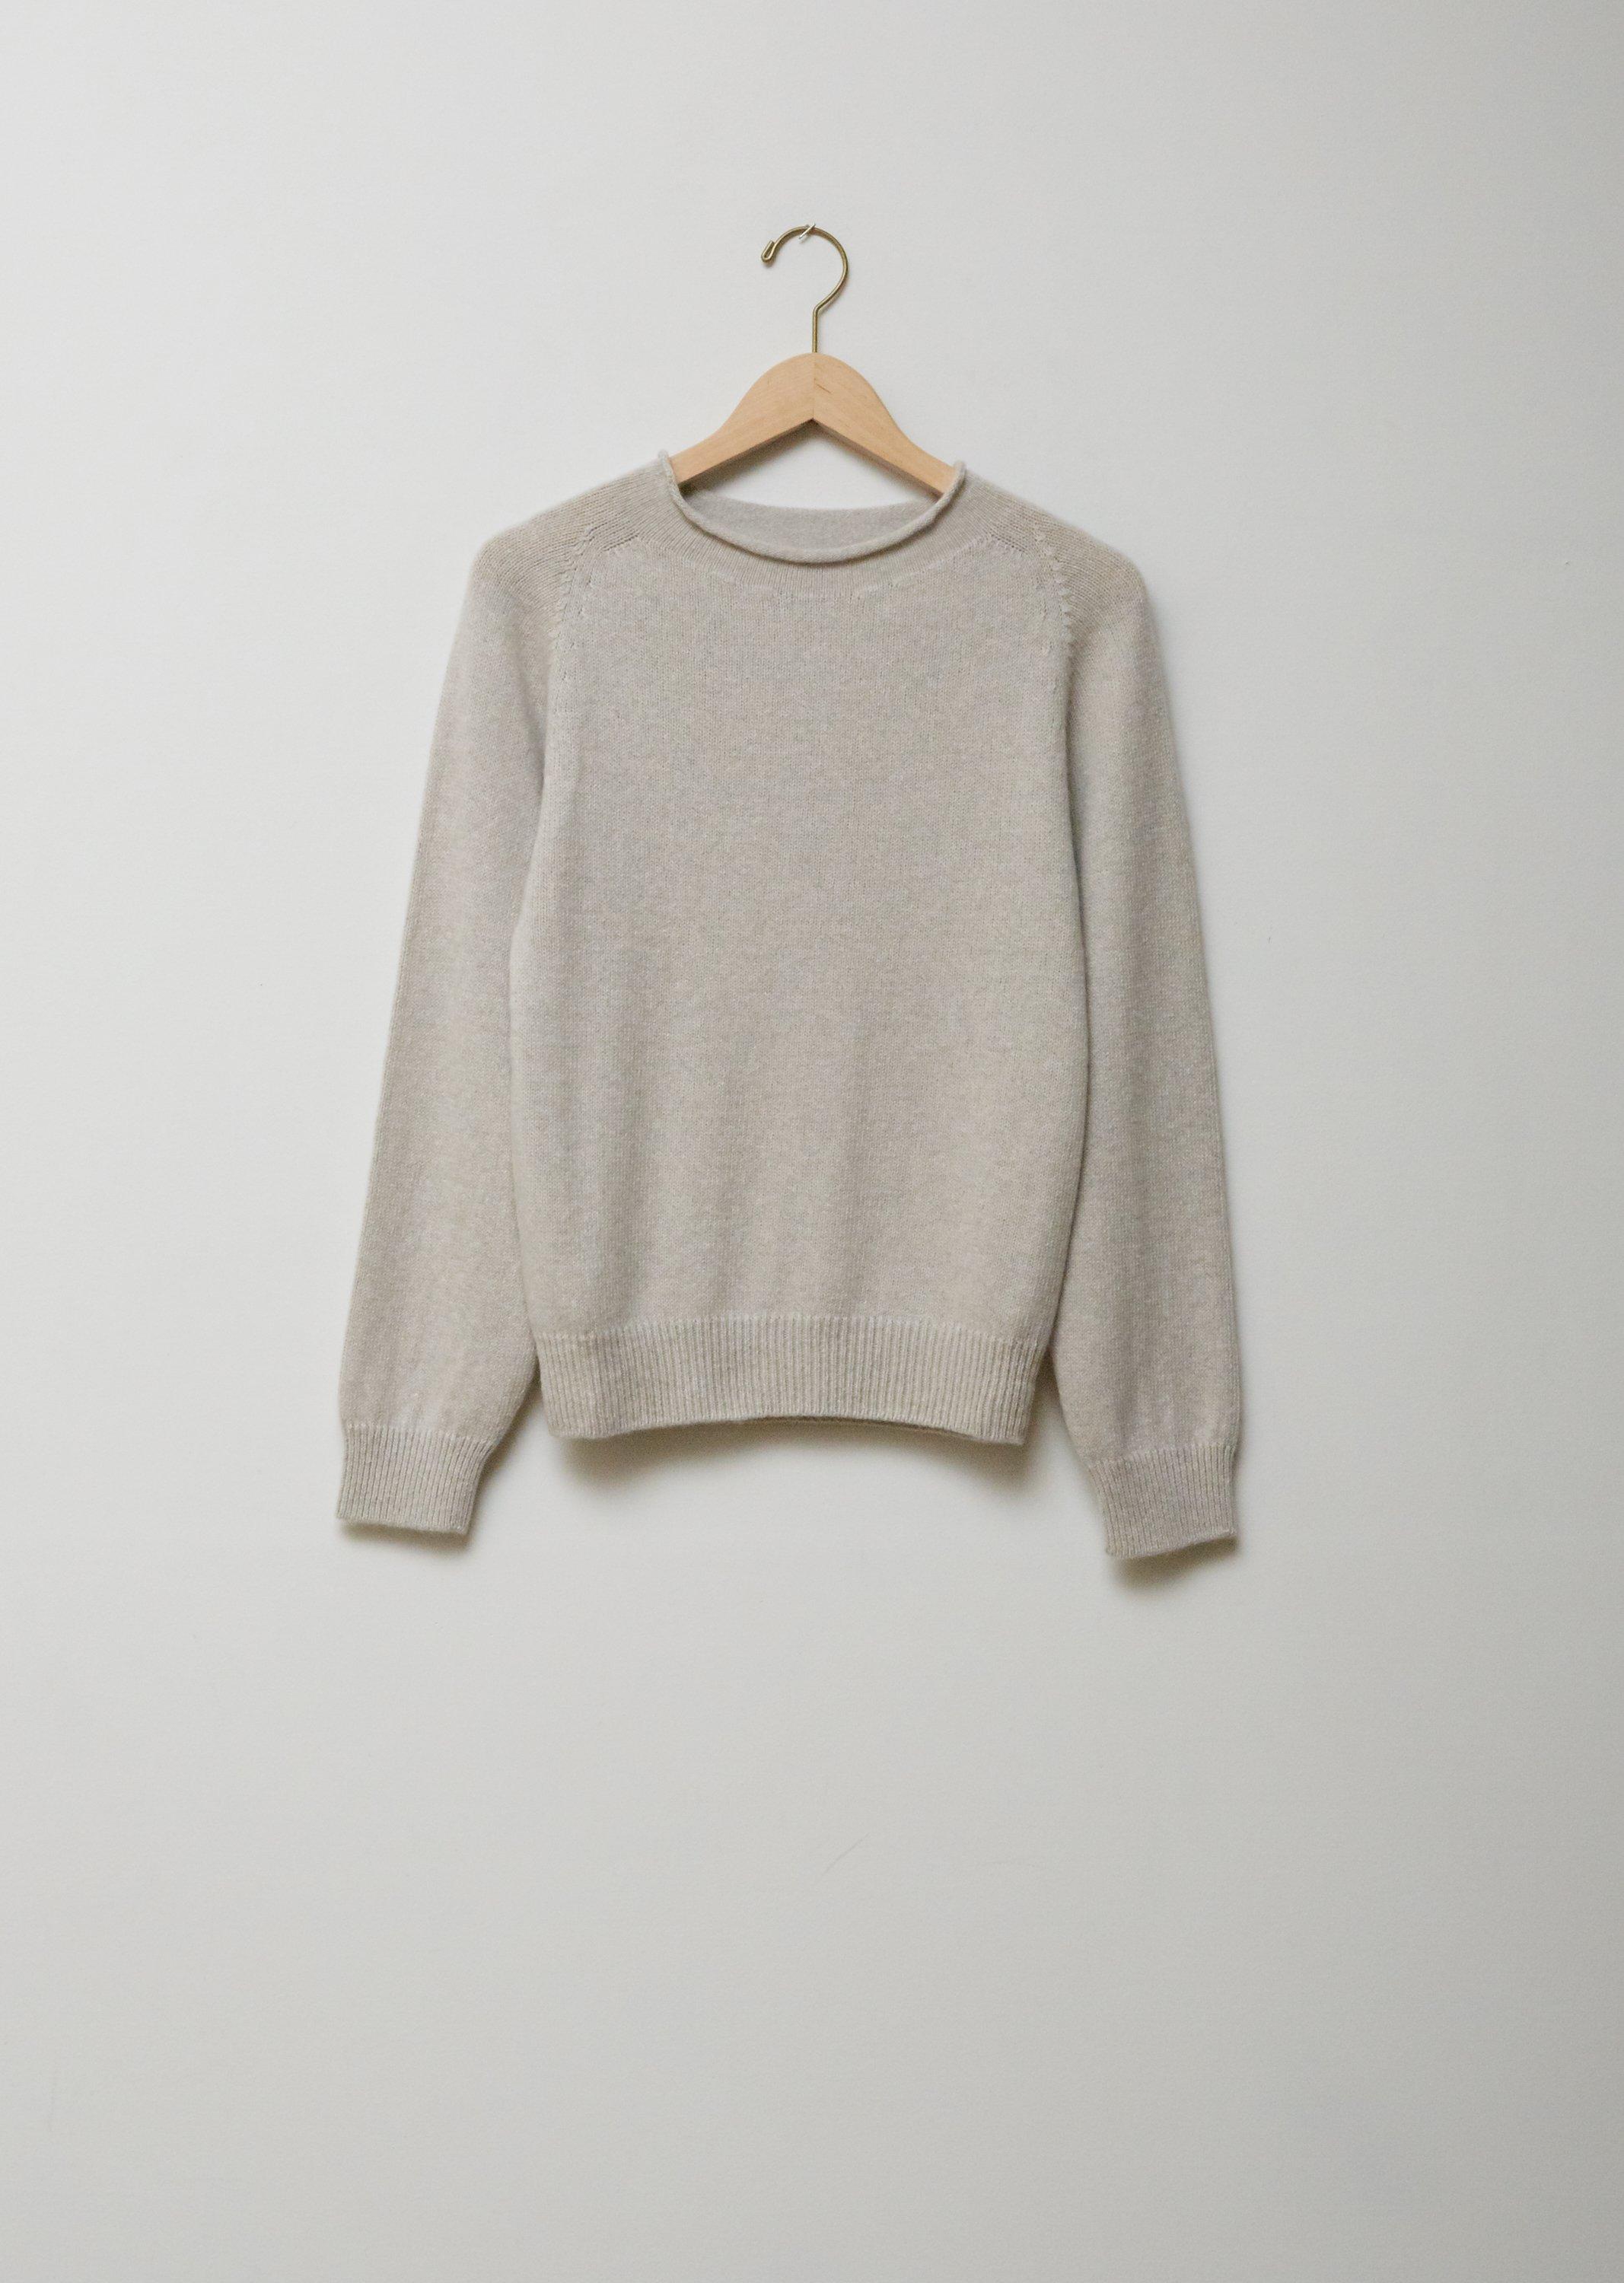 Margaret Howell Roll Neck Cashmere Sweater in Gray - Lyst